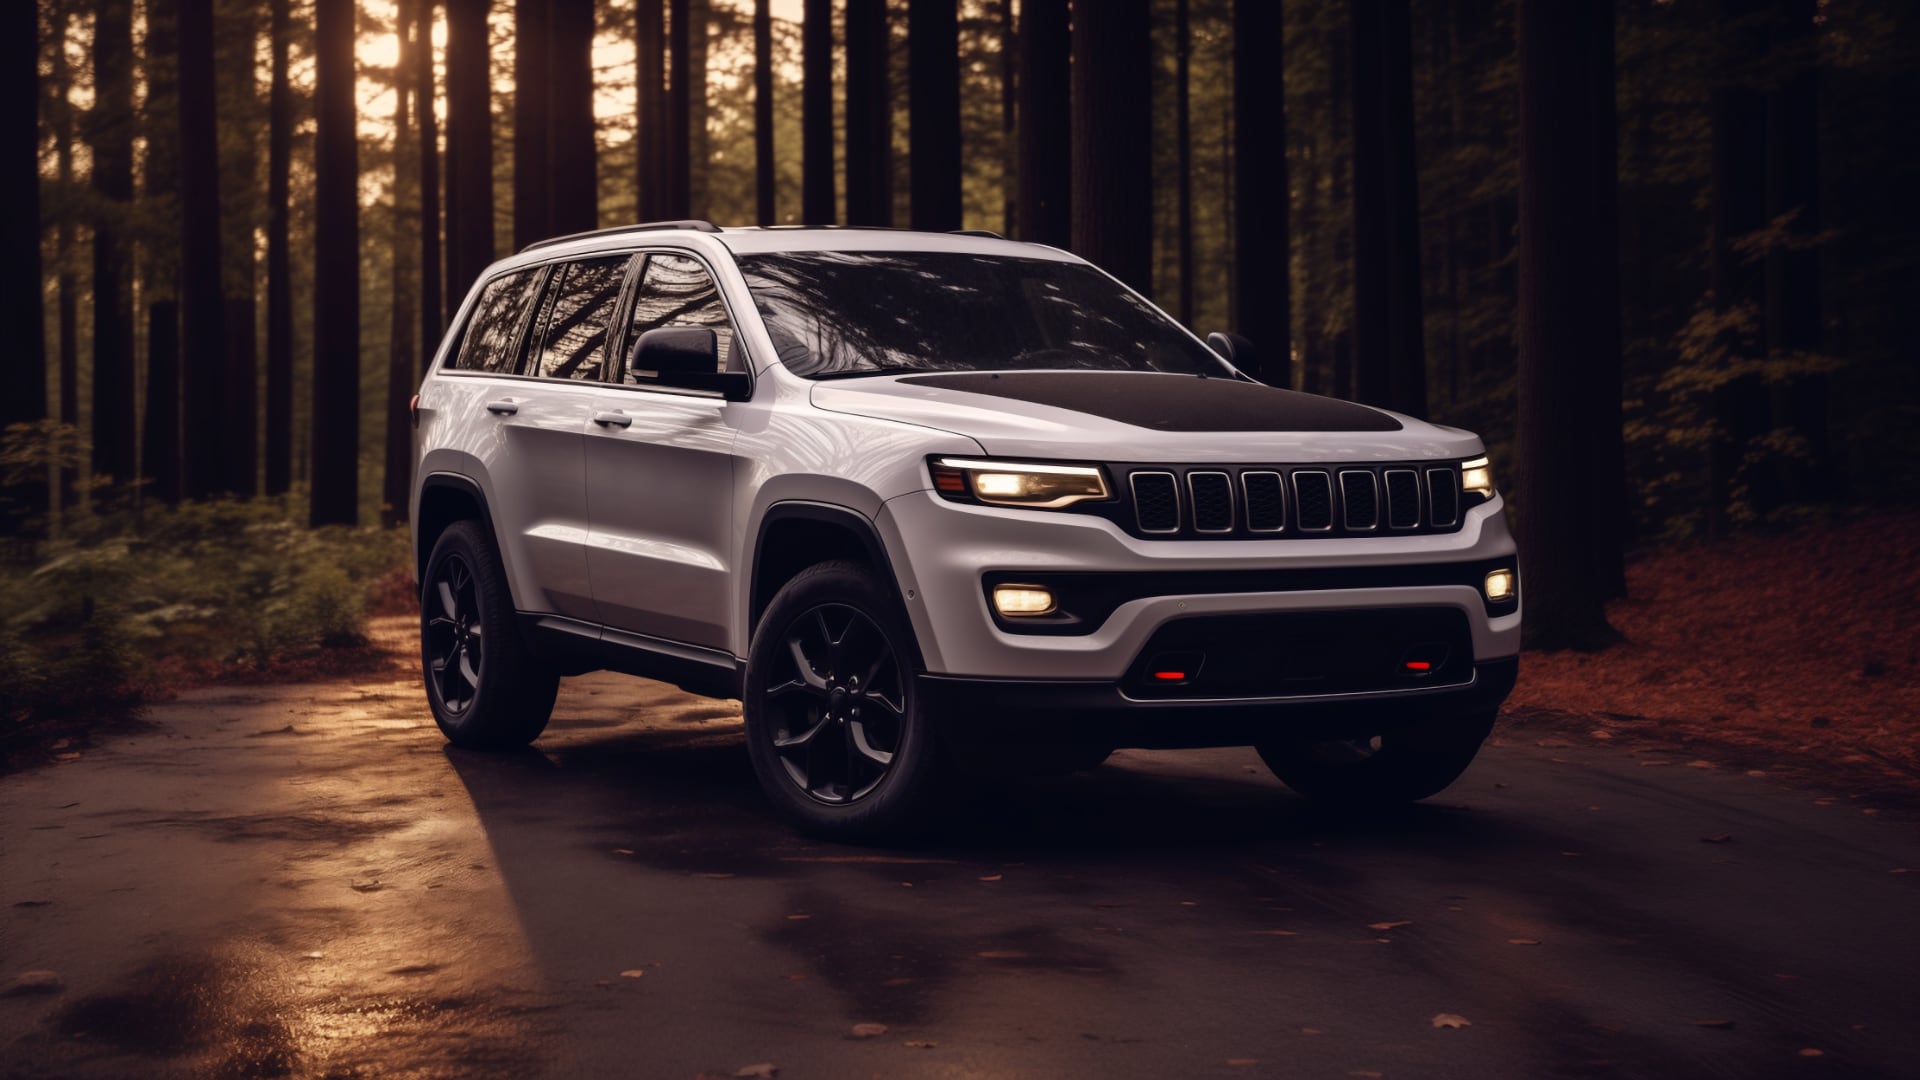 The 2020 Jeep Grand Cherokee is driving through the woods, a recommended choice for potential buyers looking to avoid years of issues.